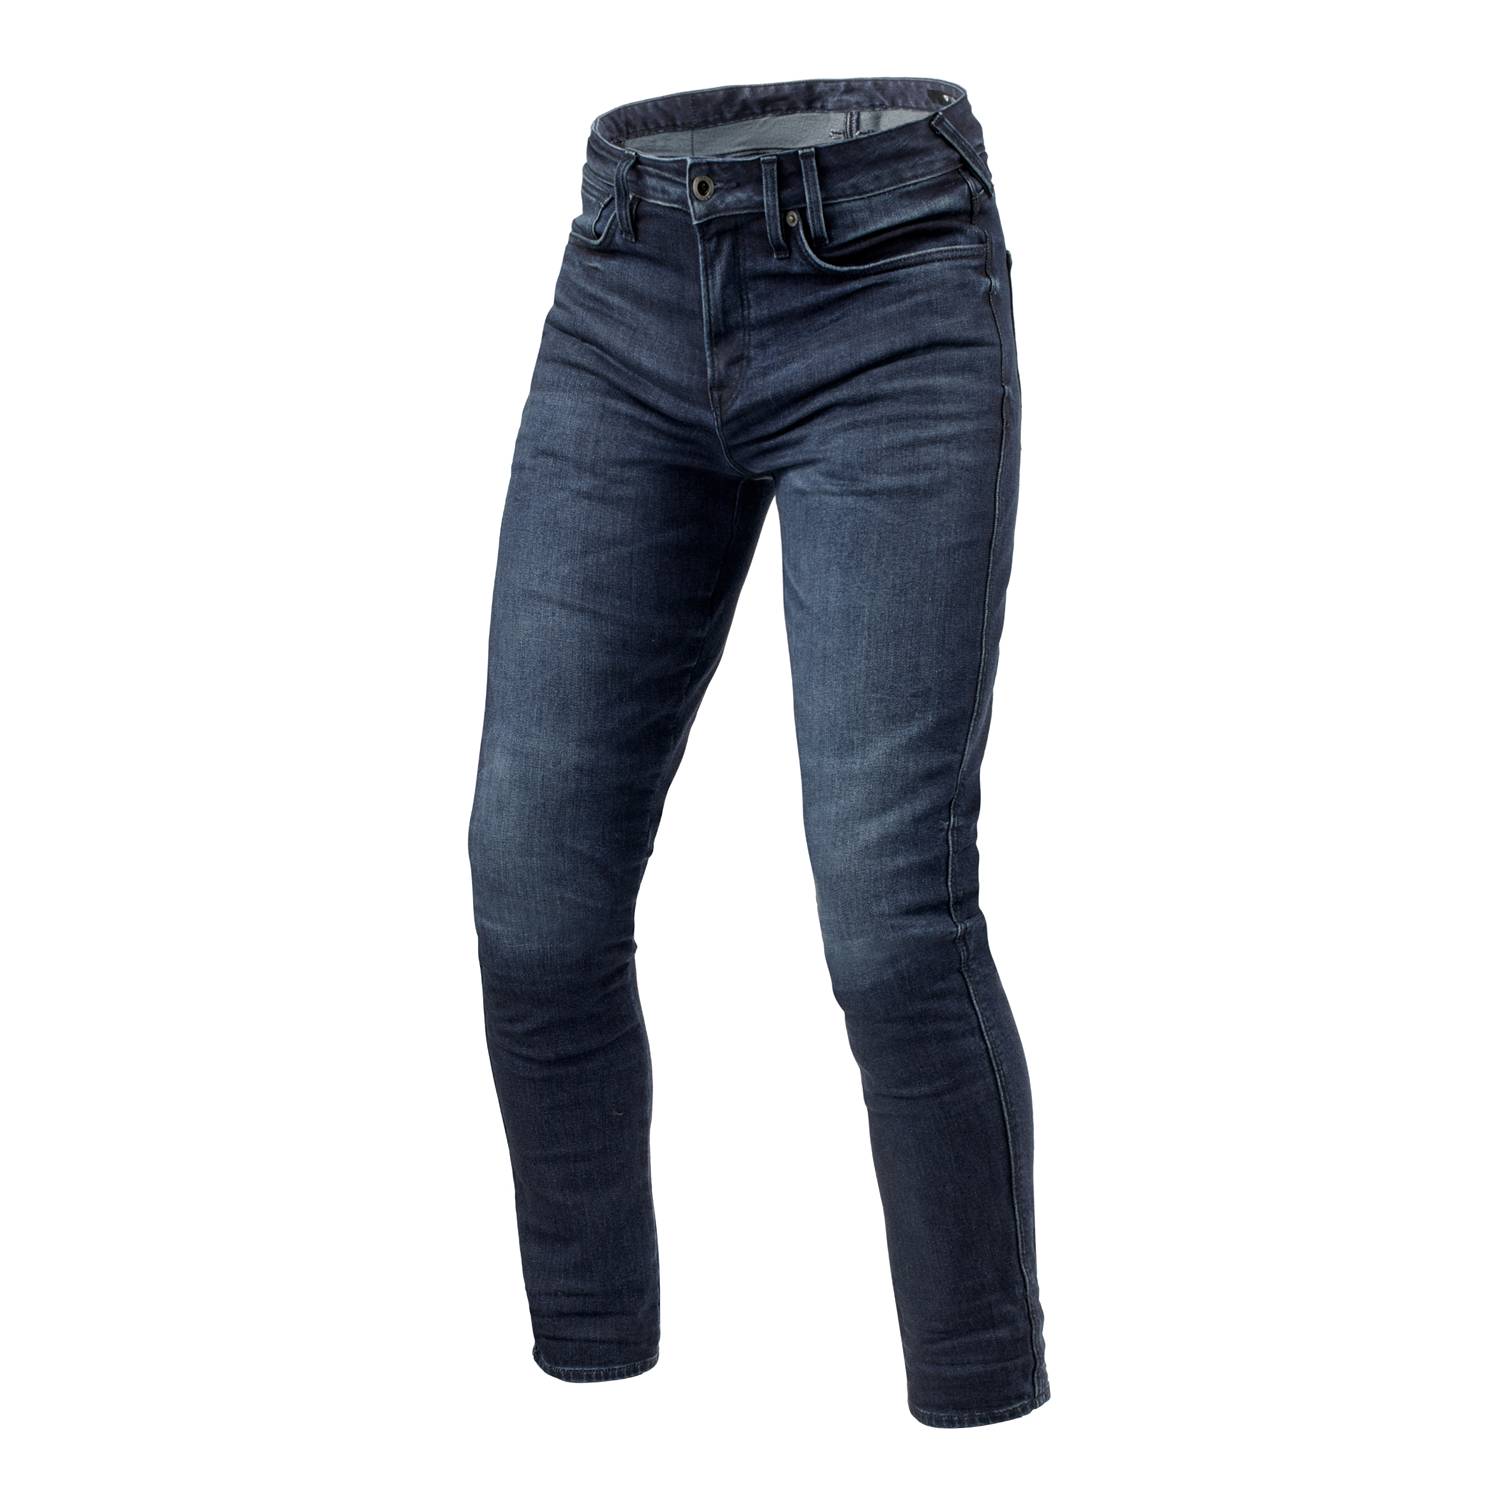 Image of REV'IT! Jeans Carlin SK Dark Blue Used L32 Motorcycle Jeans Size L32/W28 ID 8700001376457